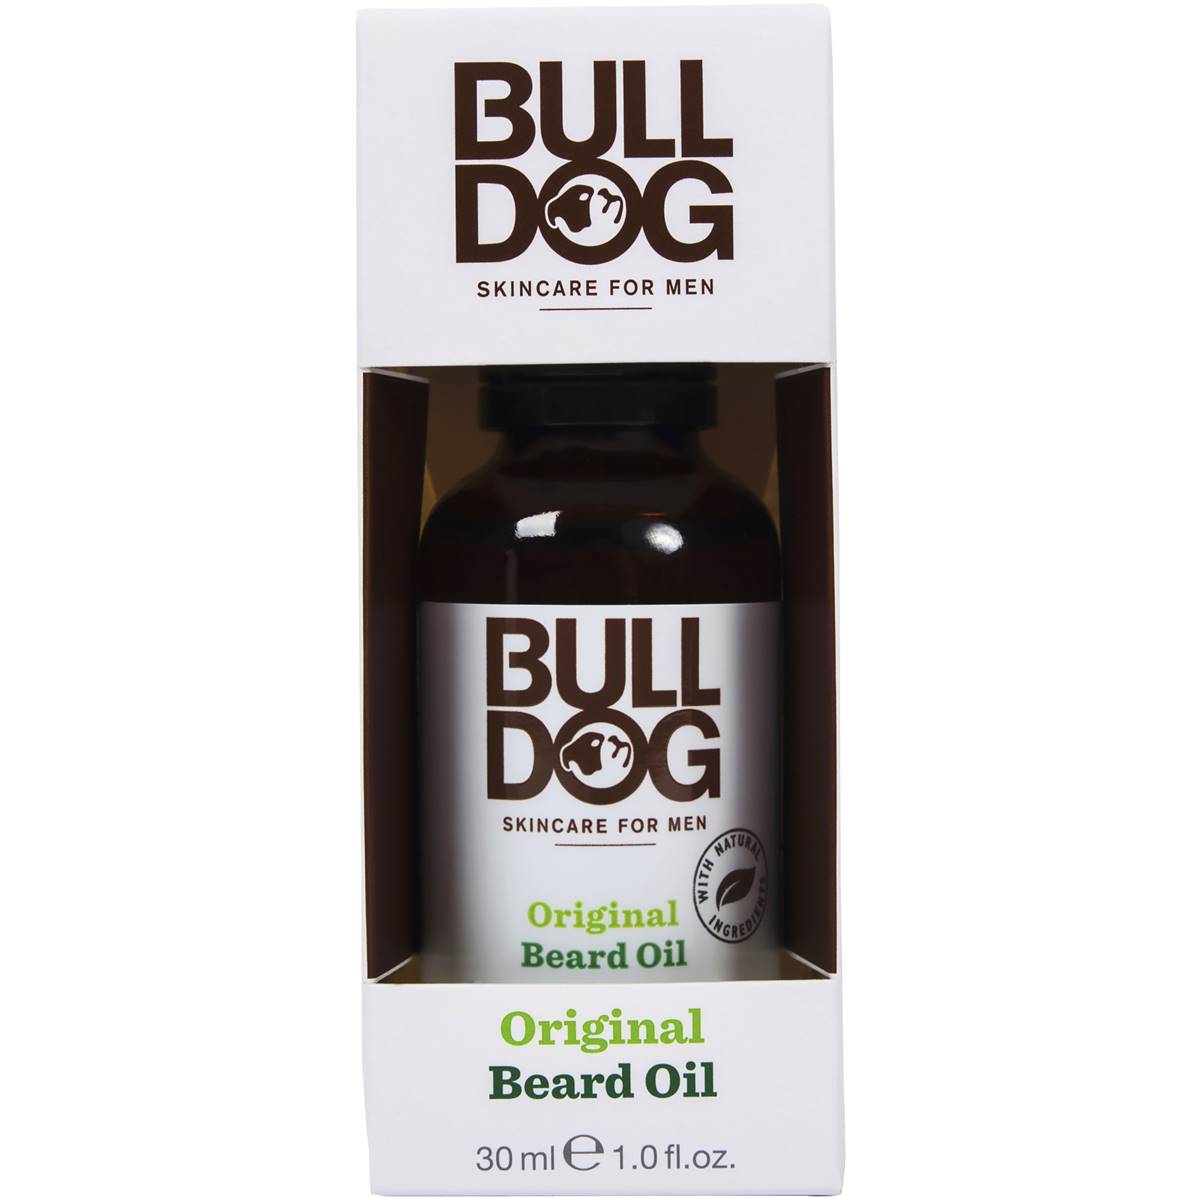 Bulldog Original Beard Oil is purpose built for men and enriched with amazing natural ingredients.  This fast-absorbing & softening beard oil contains aloe vera, camelina oil and green tea. It has been specially formulated to soften, tame and condition the beard.  This conditioning beard oil improves the shine of the beard without making it look greasy.  Not only will our unique blend of 8 essential oils leave your beard smelling great but our Original Beard Oil improves the overall shine of the beard.